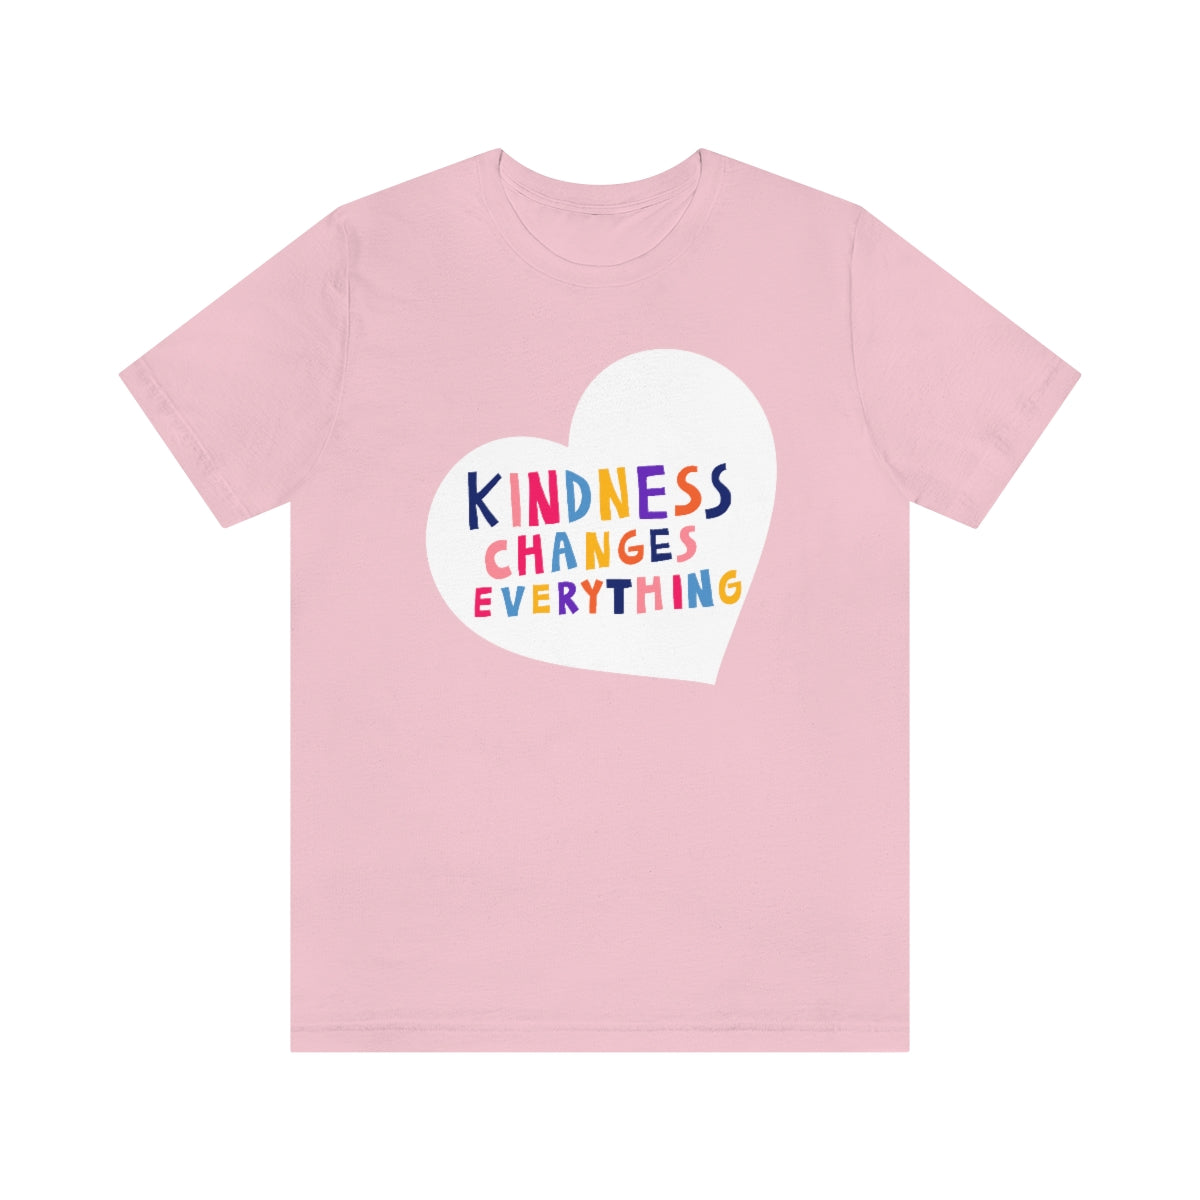 Unisex Jersey Short Sleeve Tee "Pink shirt DAY Kindness changes everything"